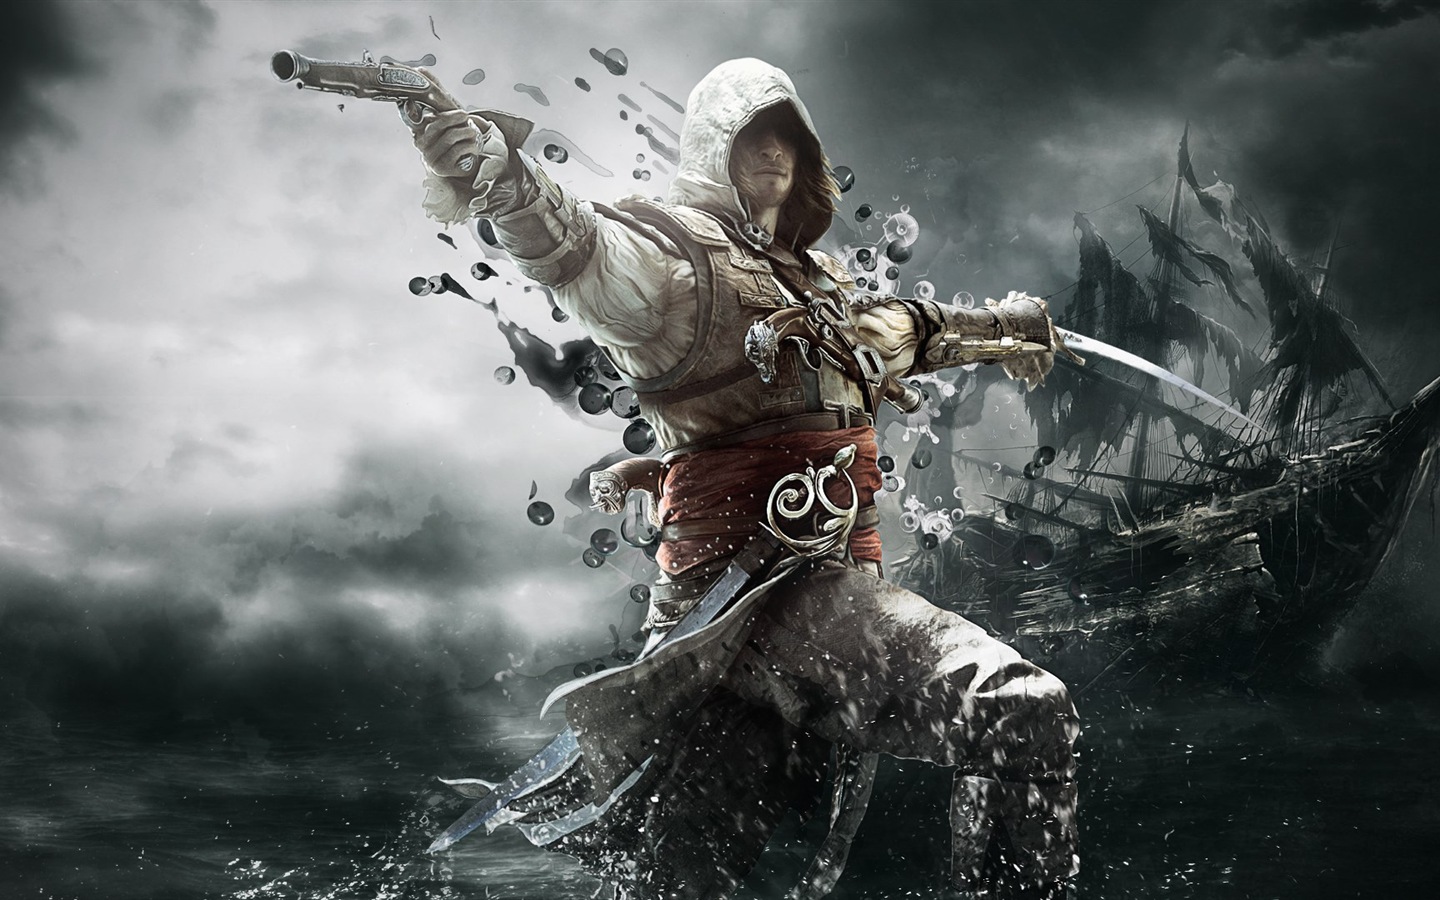 Creed IV Assassin: Black Flag HD wallpapers #8 - 1440x900